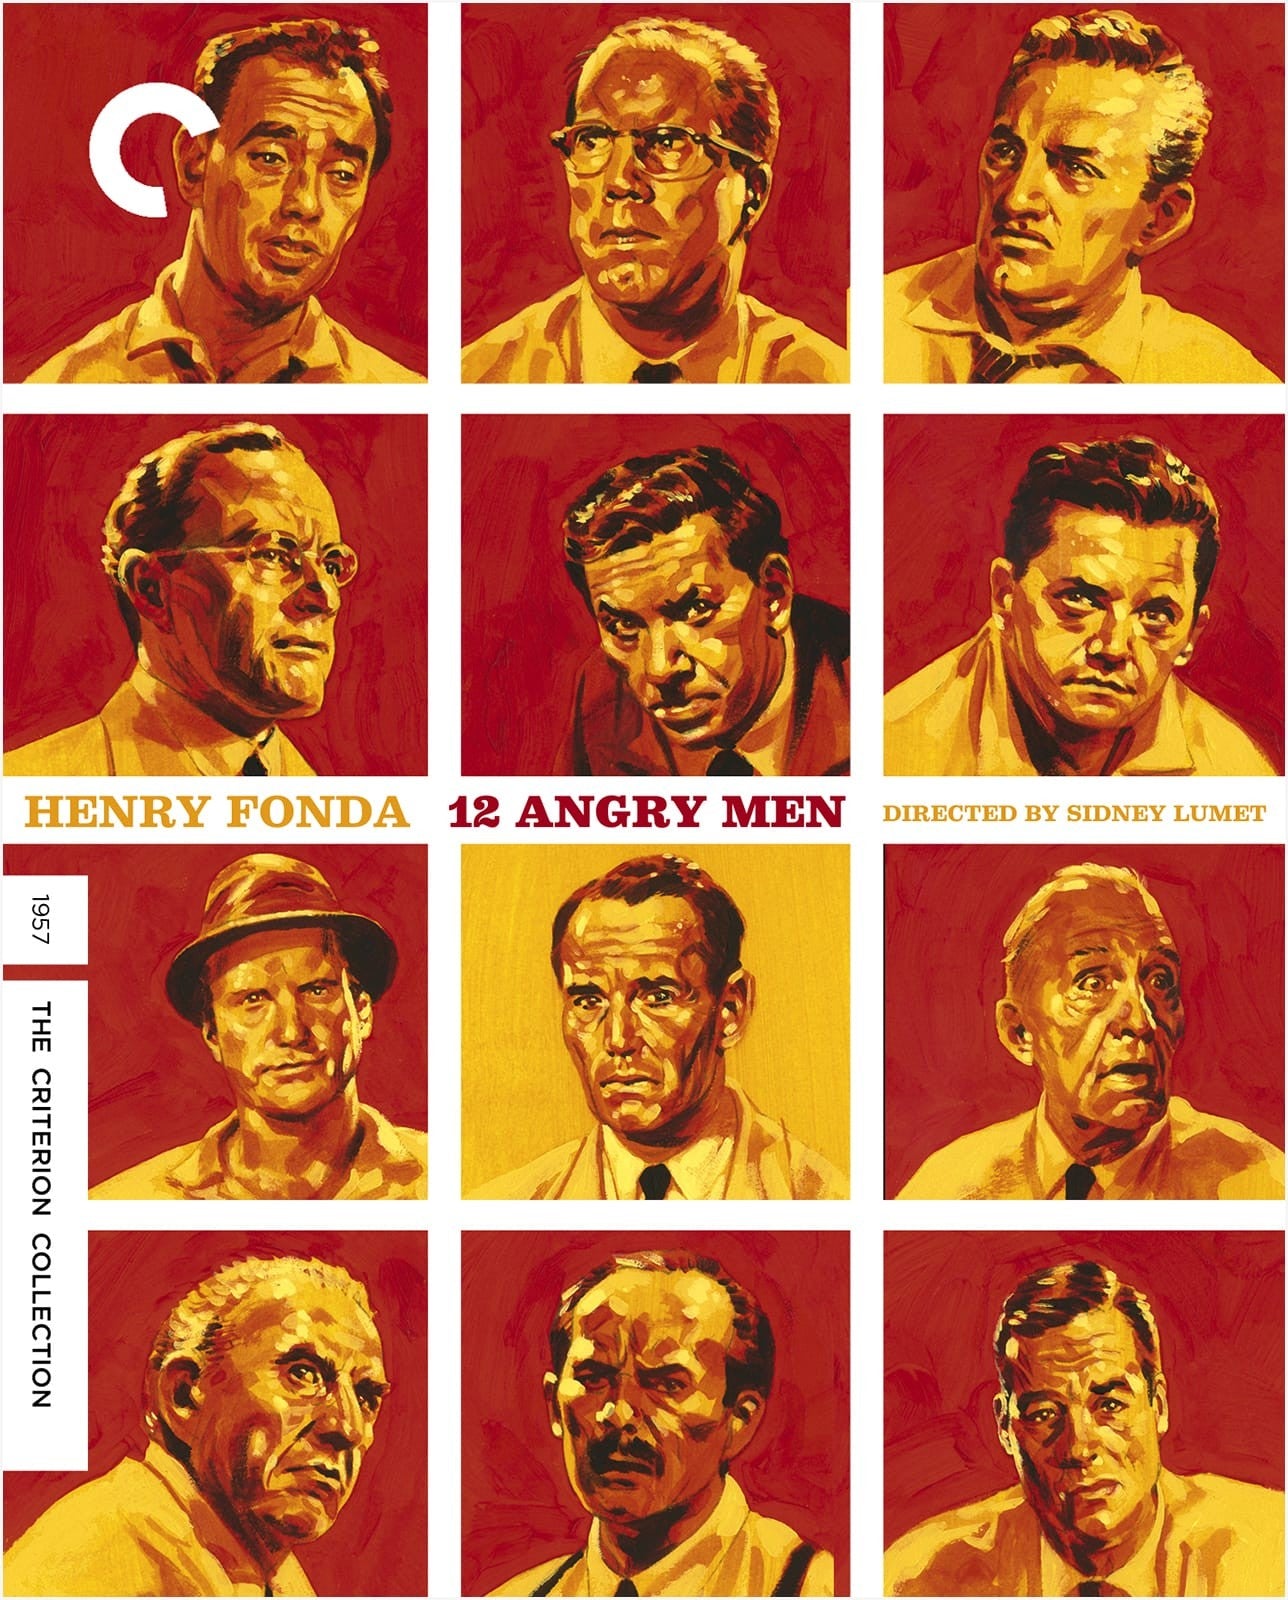 12 Angry Men - Criterion Collection (Blu-ray)